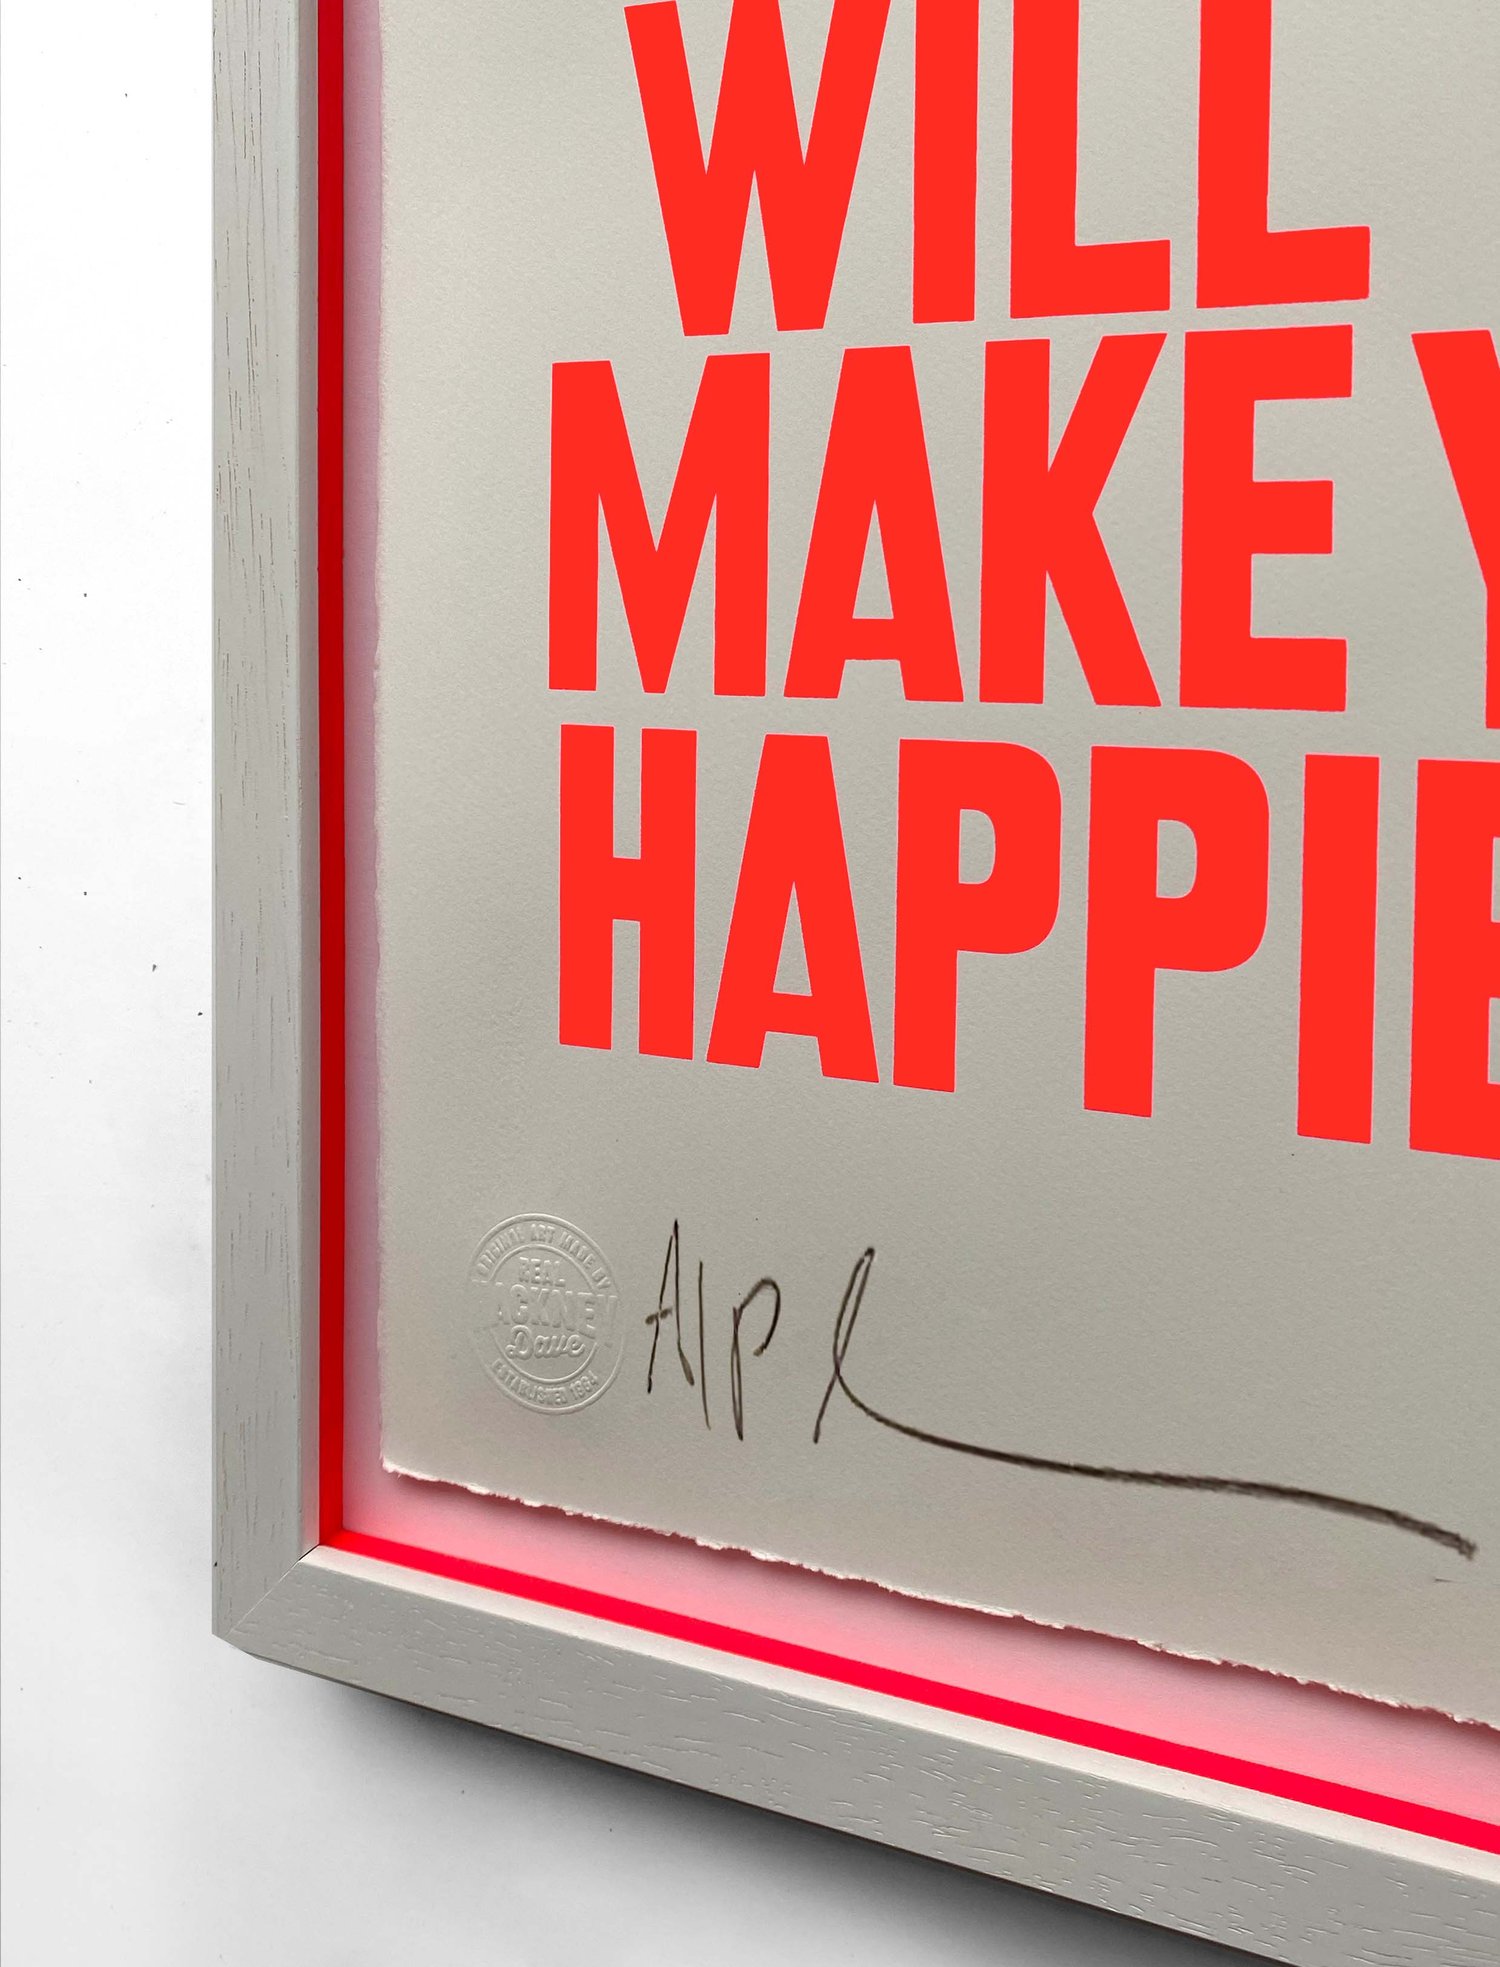 Image of 'Gentle reminder to stop fucking around..' (screen print - red on off white ) by Hackney Dave